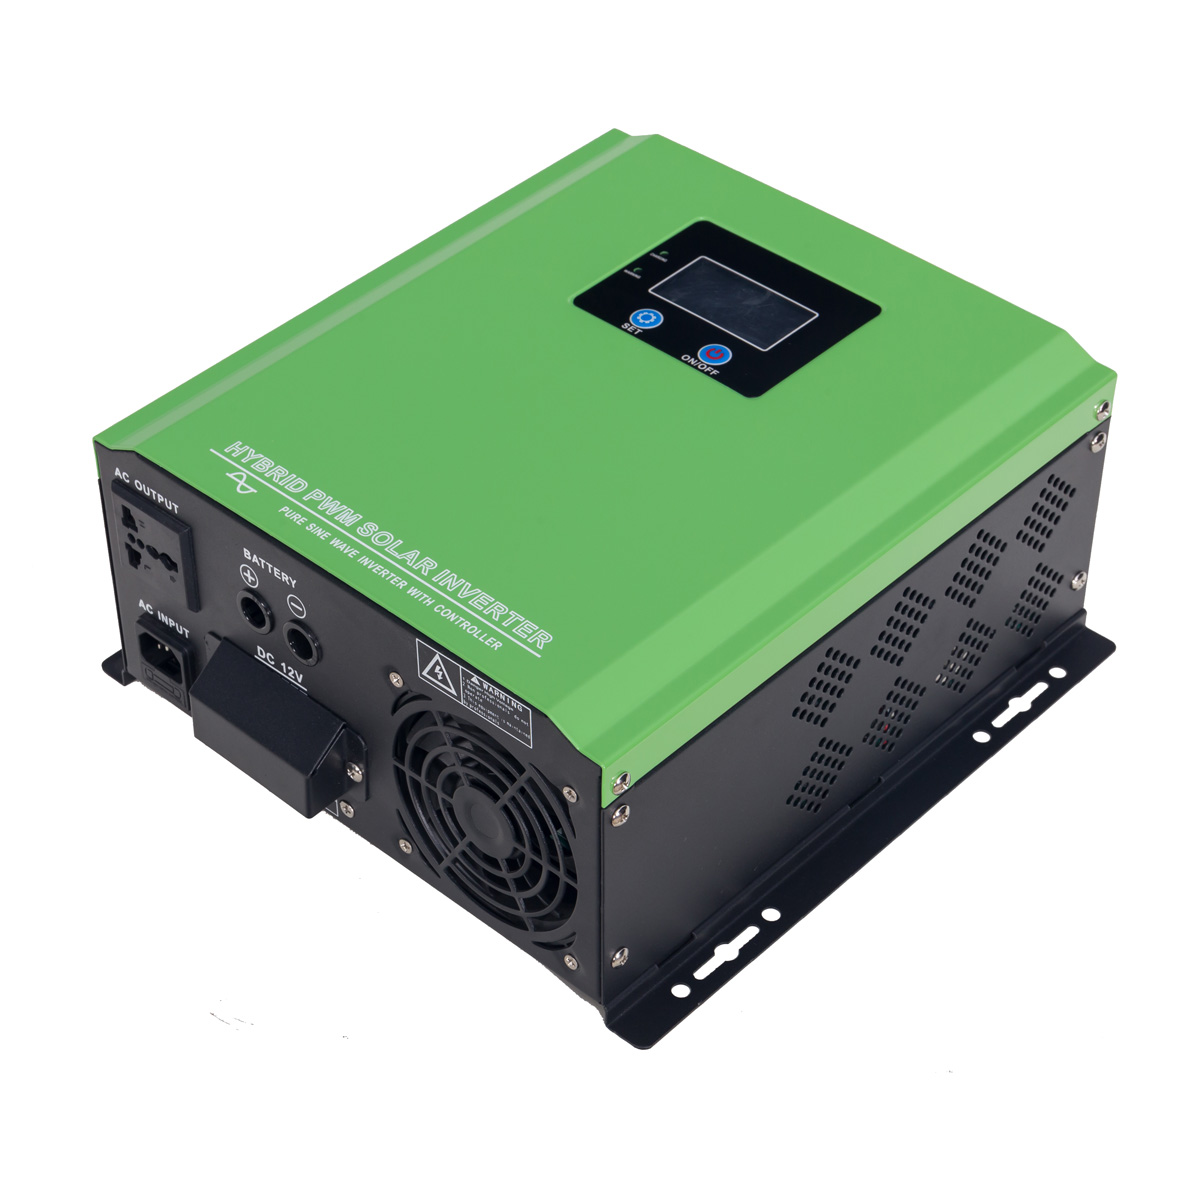 1500W Hybrid Power Inverter Low Frequency Pure Sine Wave Inverter with Controller Charger Solar Power System